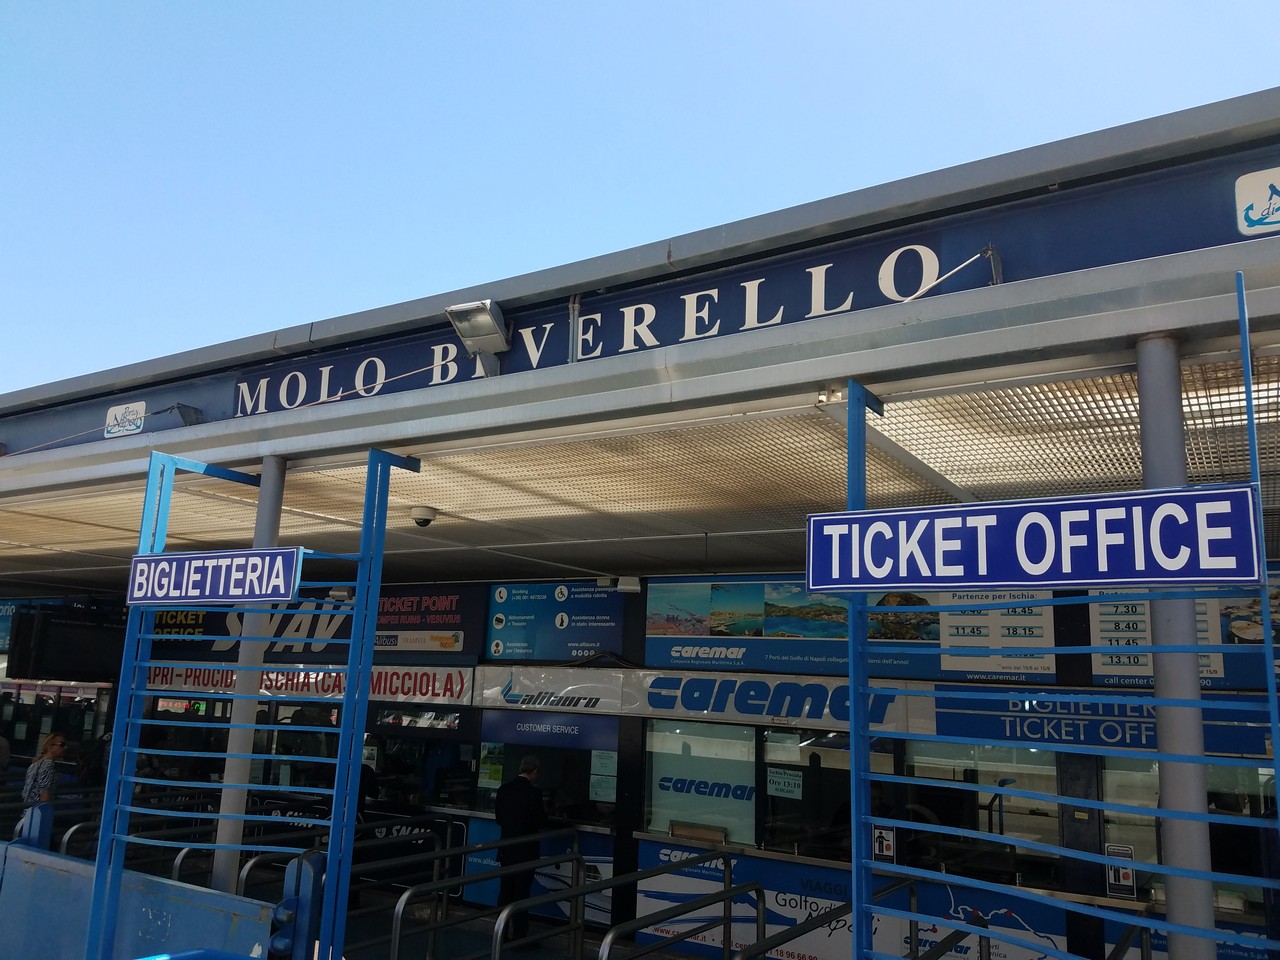 a ticket office with blue signs